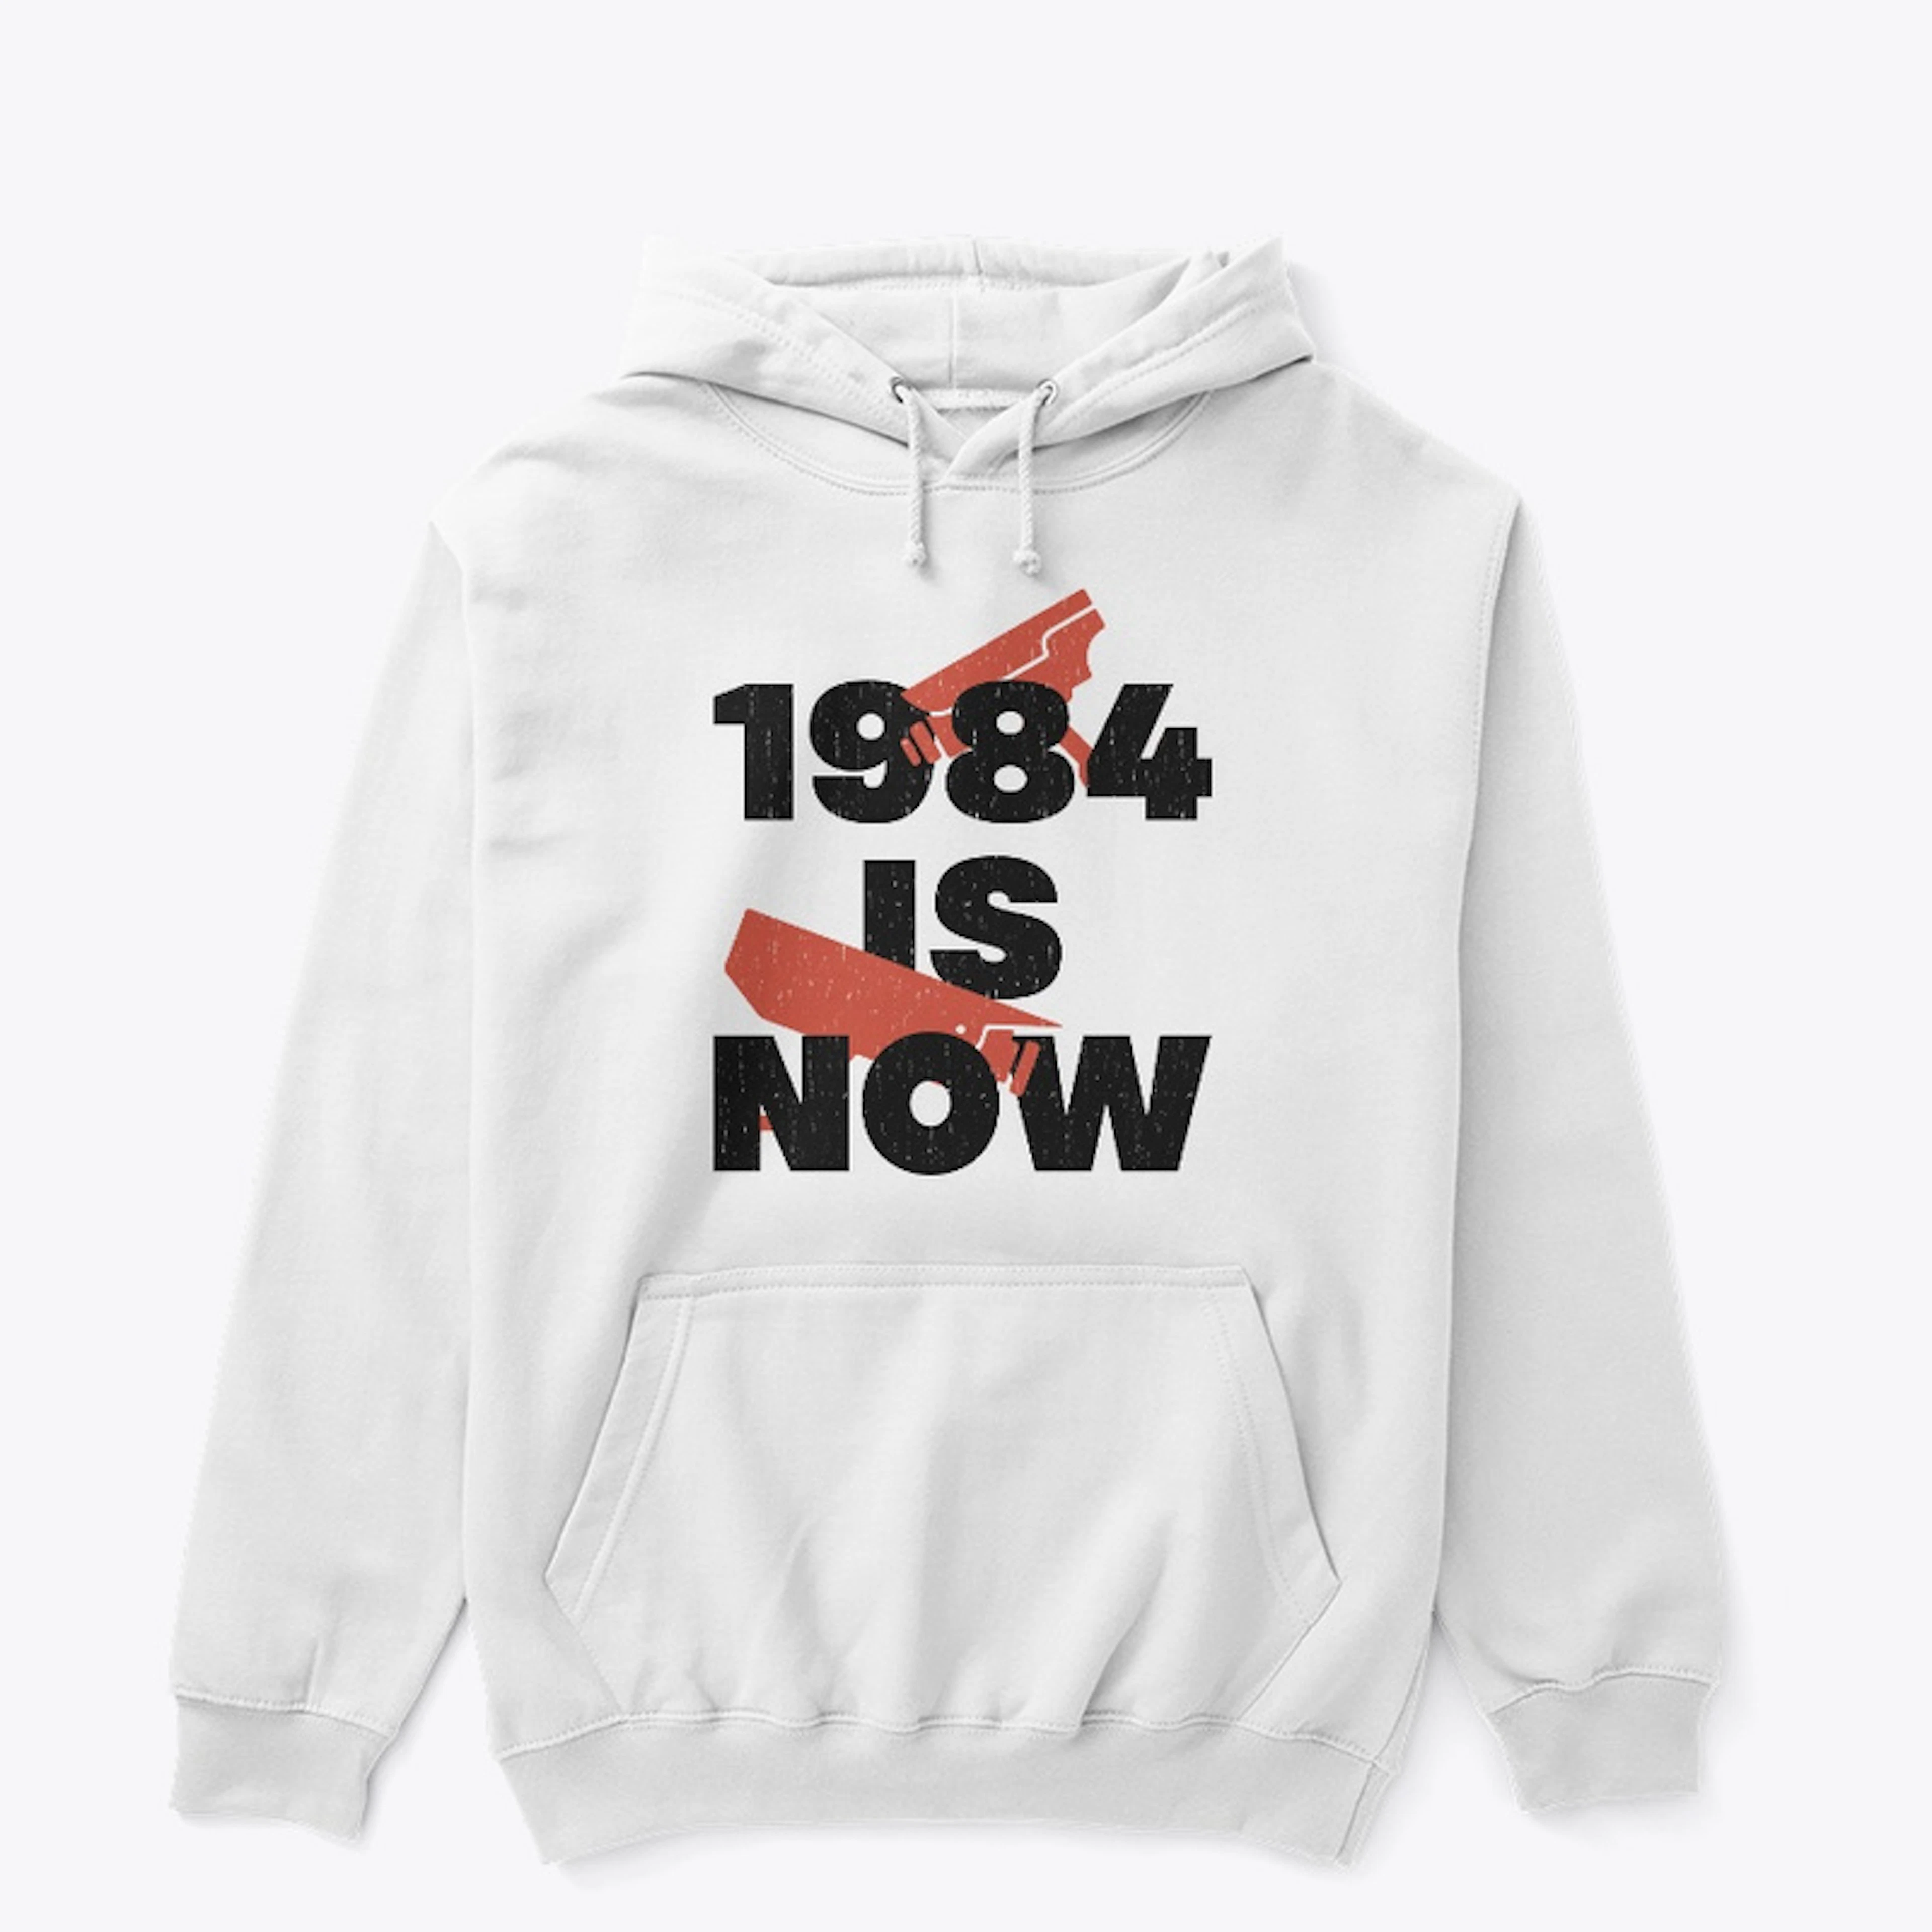 1984 is Now T-Shirt